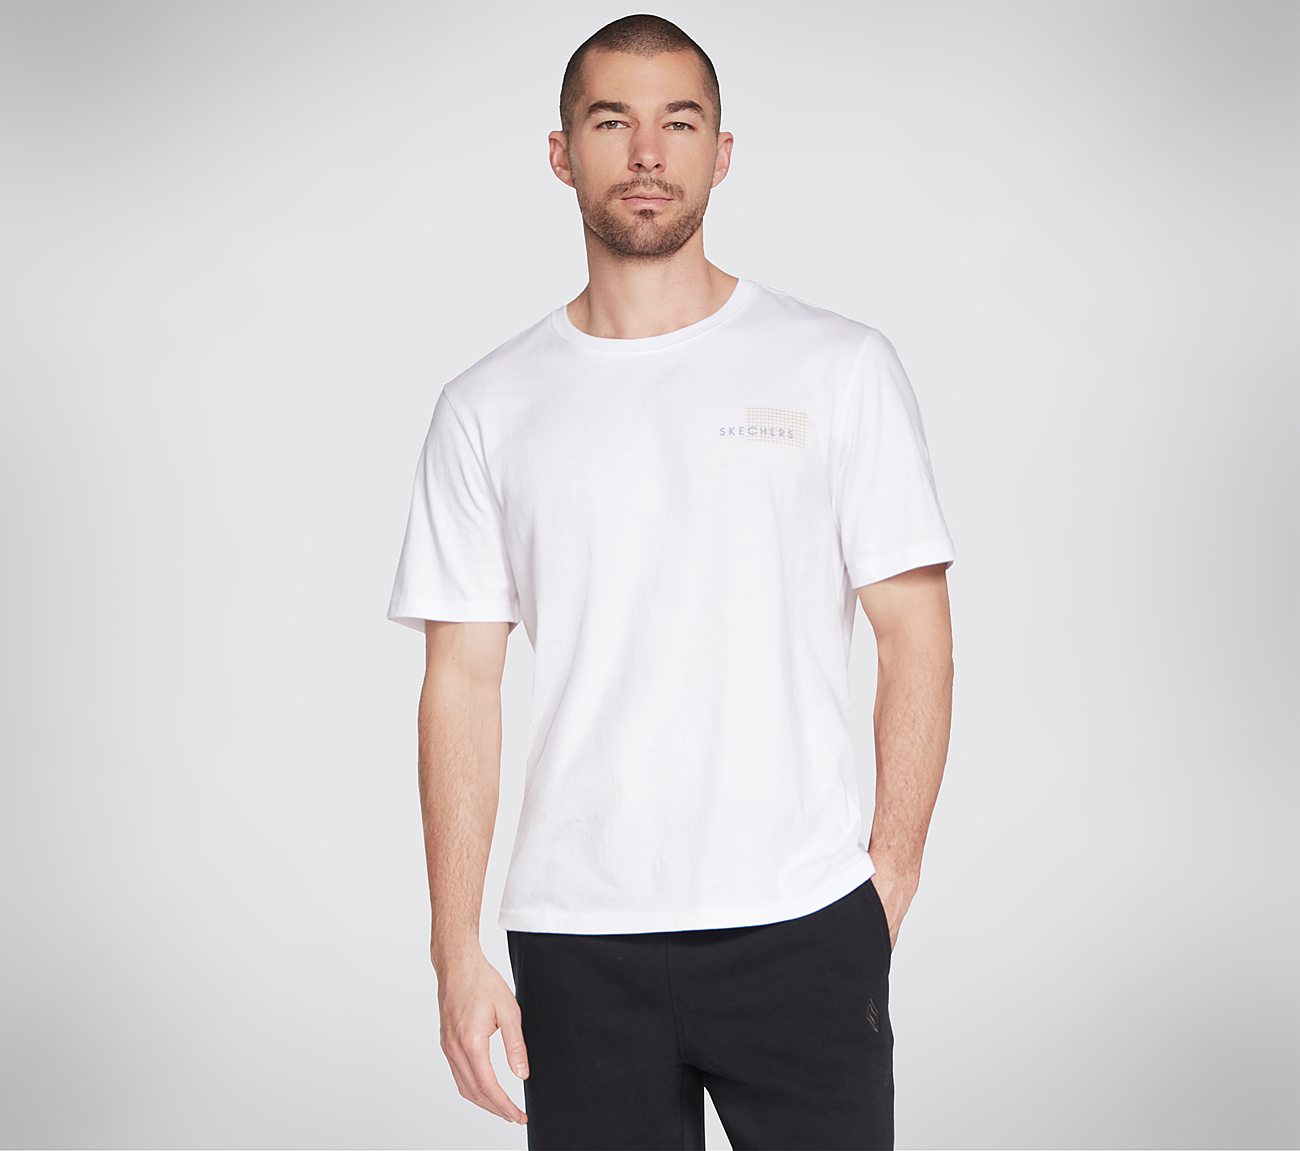 SKECHERS OFF THE GRID TEE, WWWHITE Apparel Lateral View